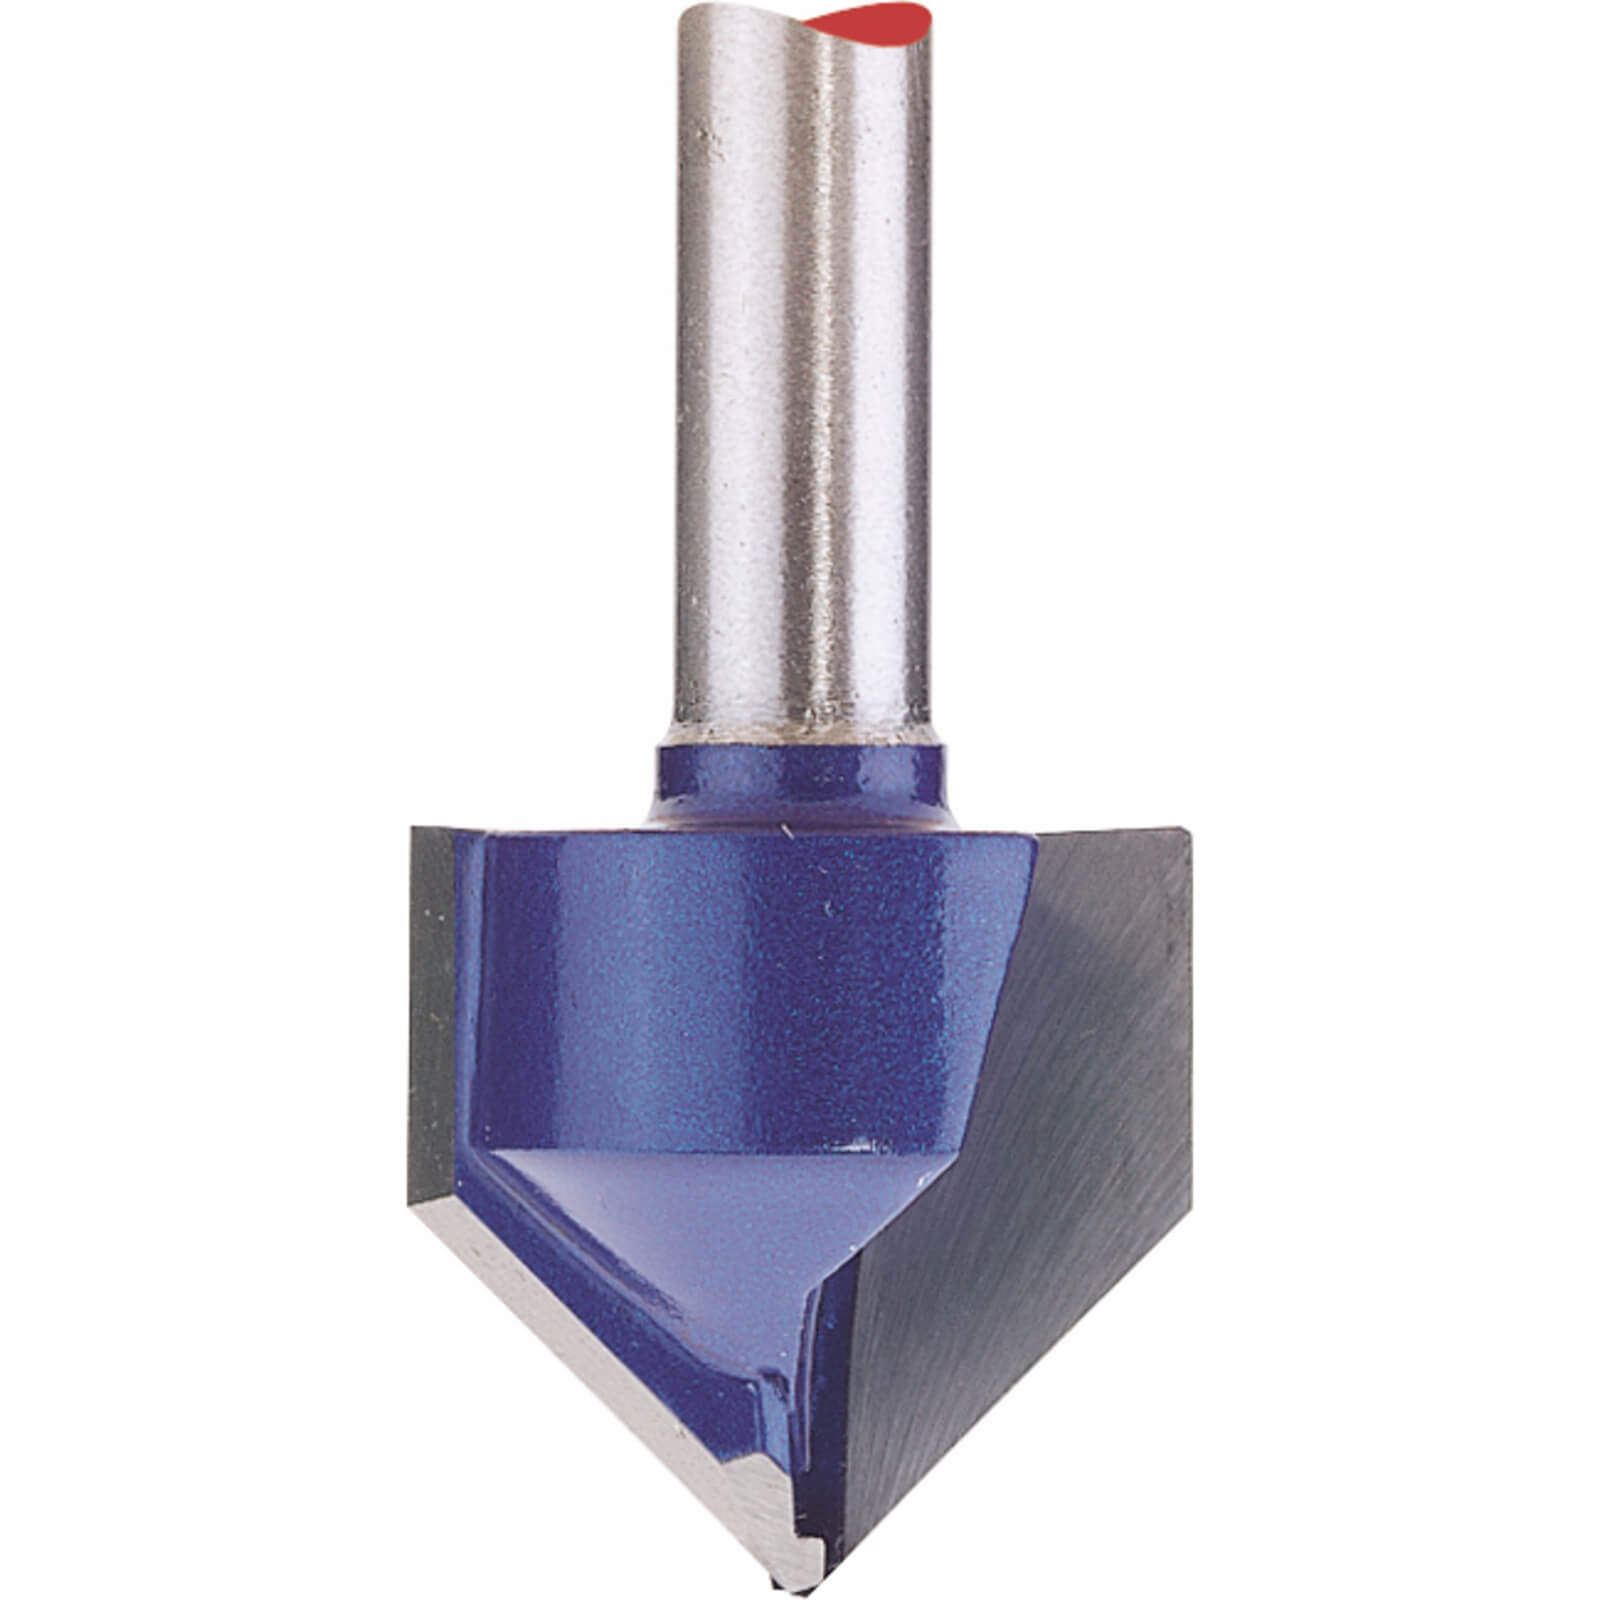 Image of Draper V Groove Router Cutter 19mm 19mm 1/4"